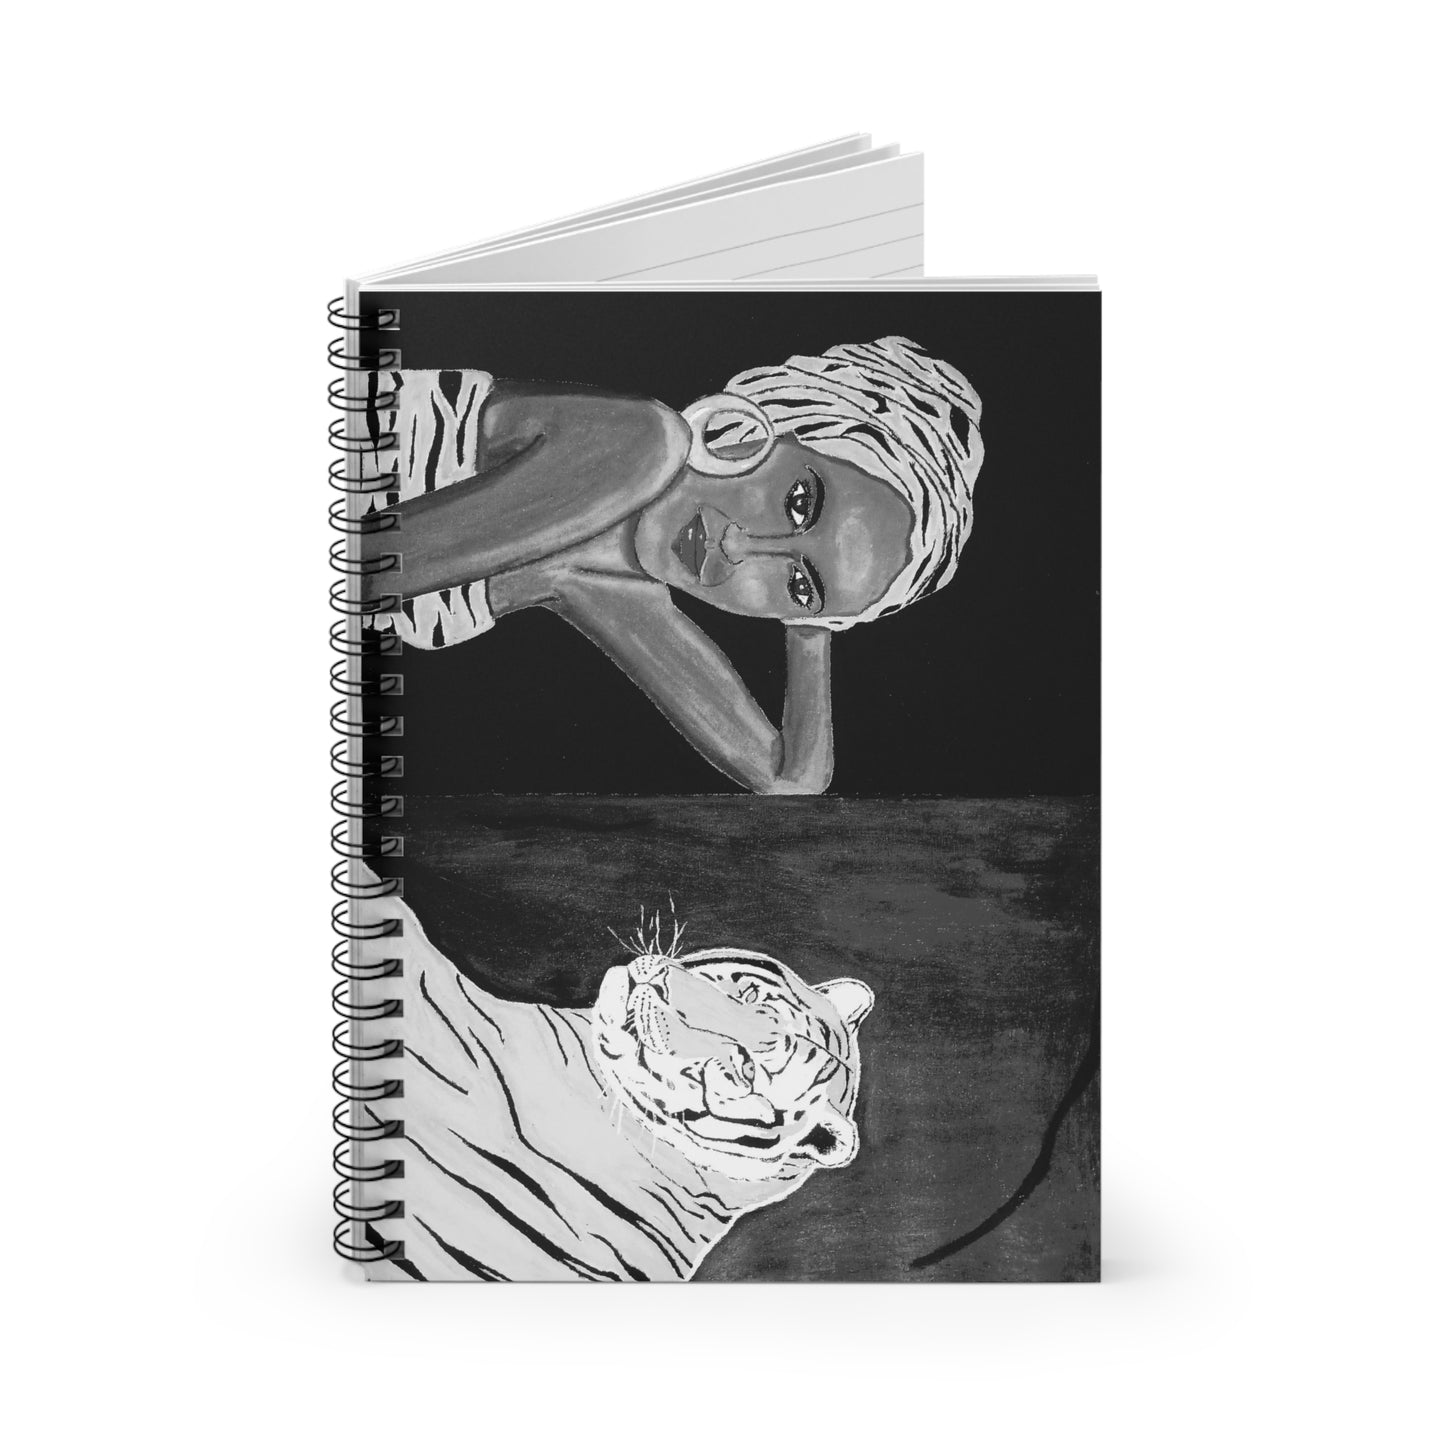 Charcoal Grey Tiger Spiral Notebook - Ruled Line